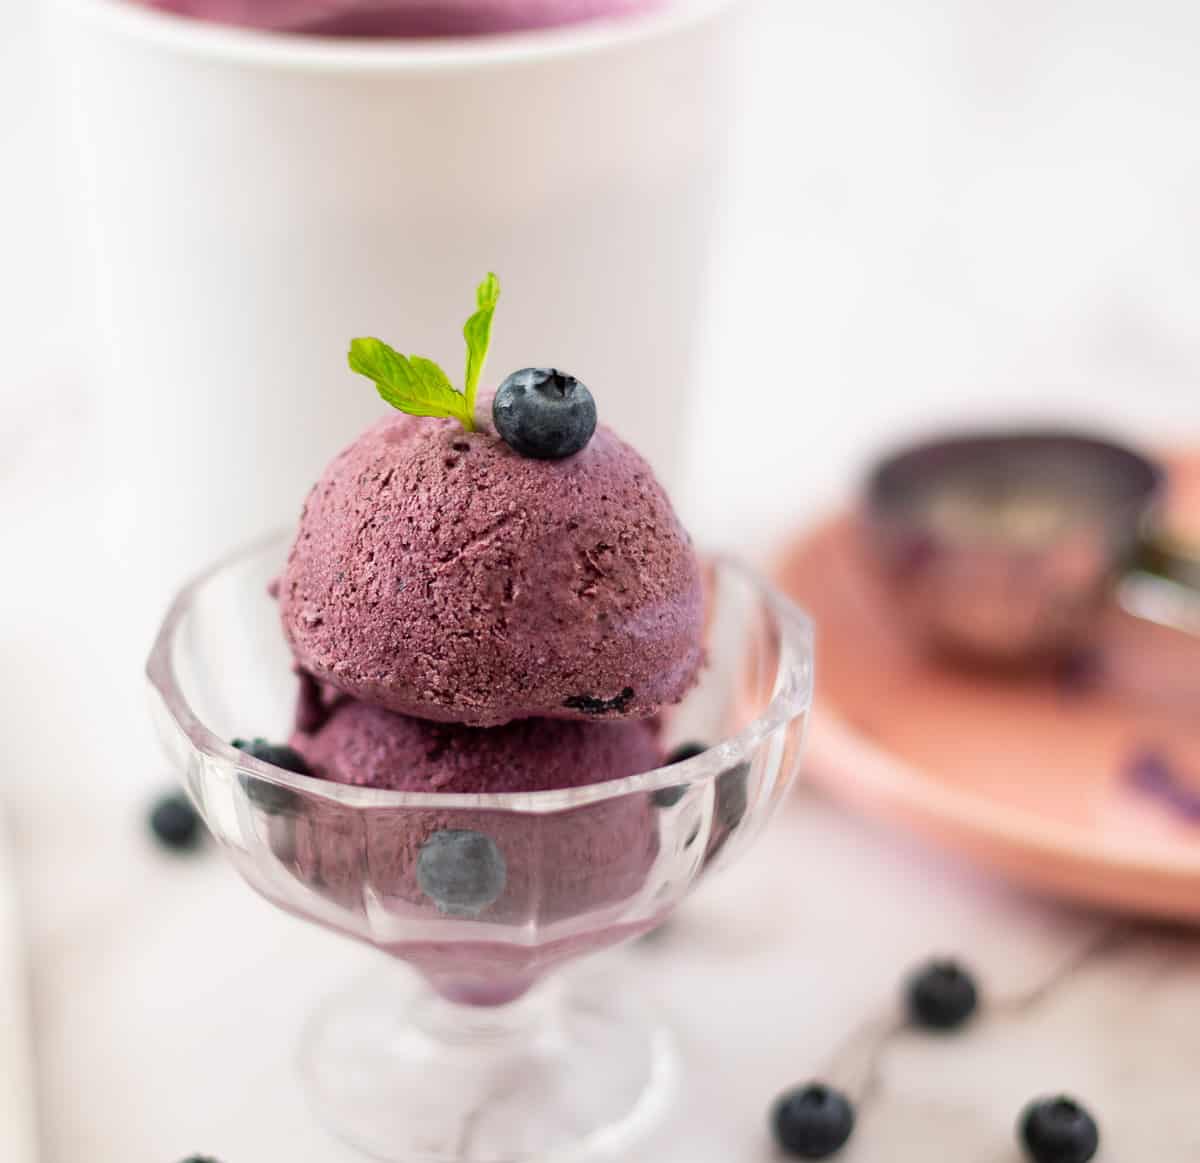 A glass bowl with blueberry ice cream scoops.